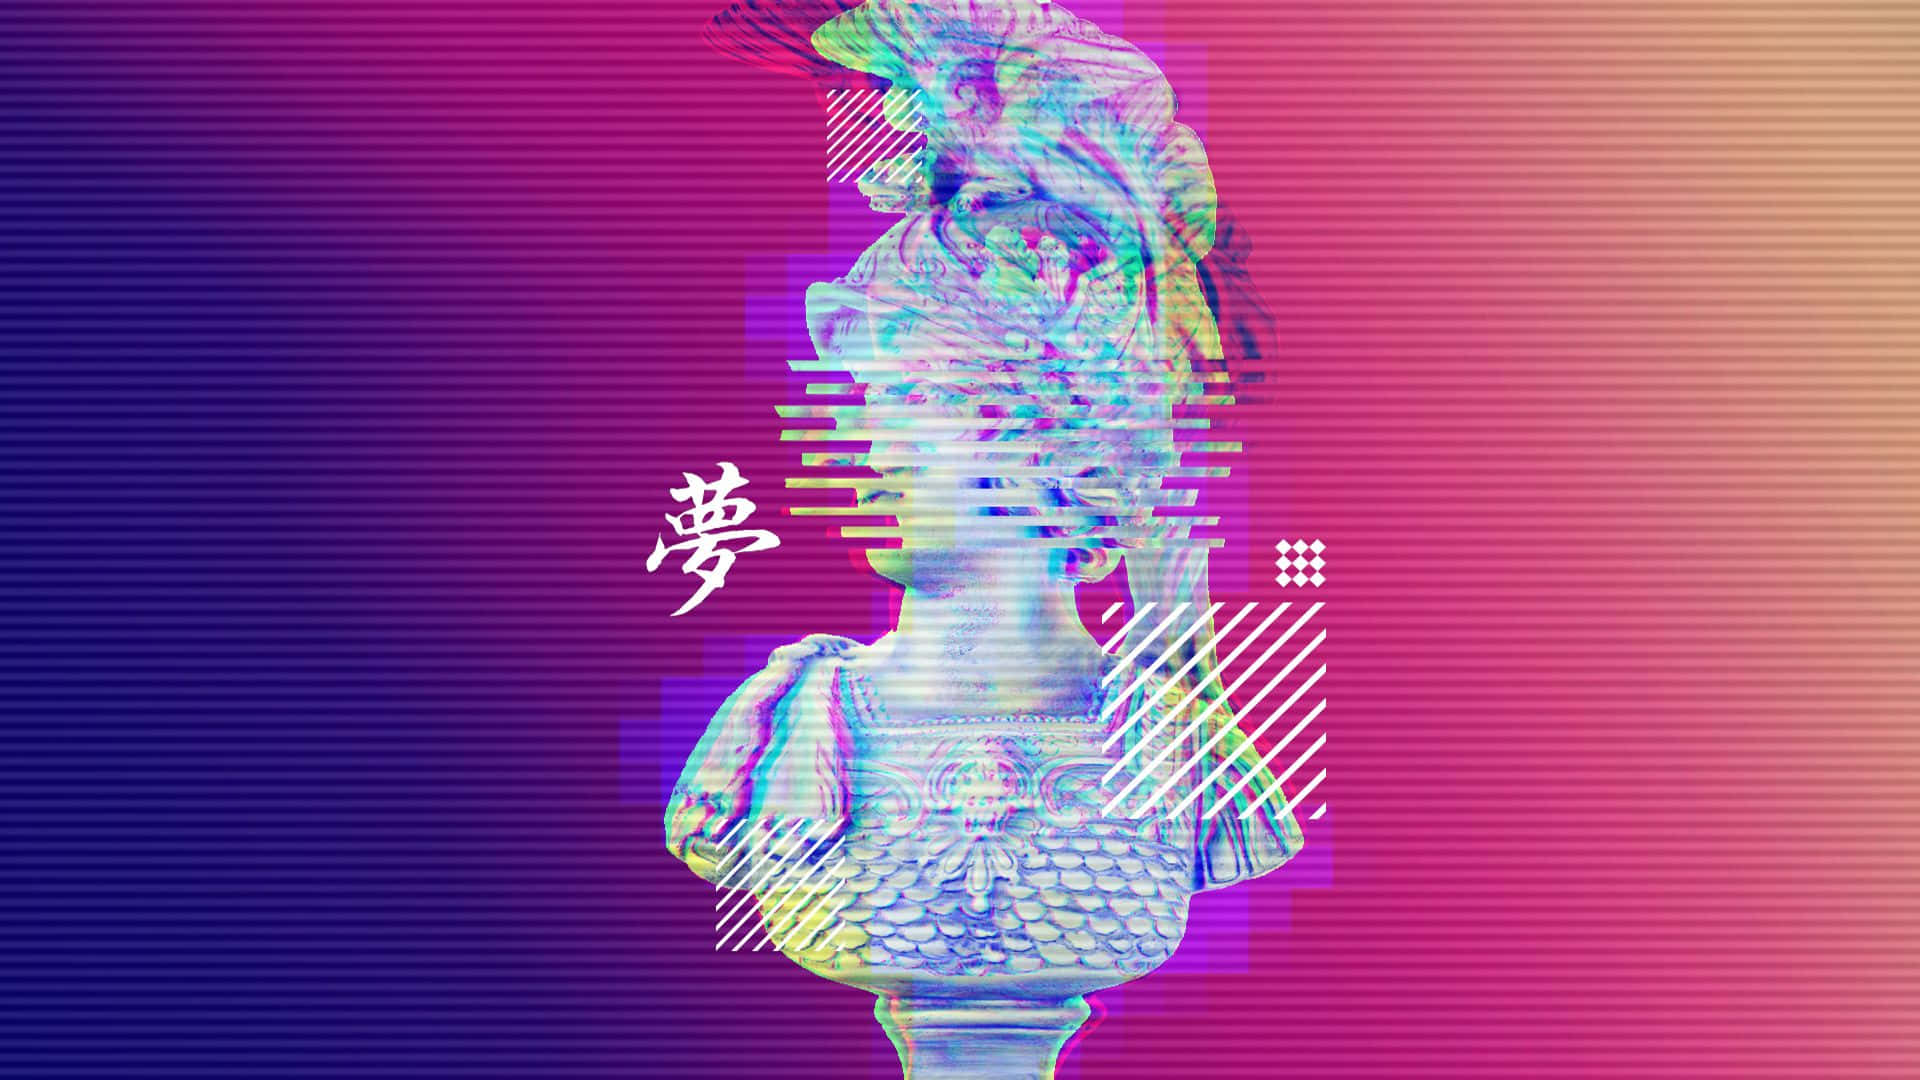 Unleash your creativity with this glitchy background